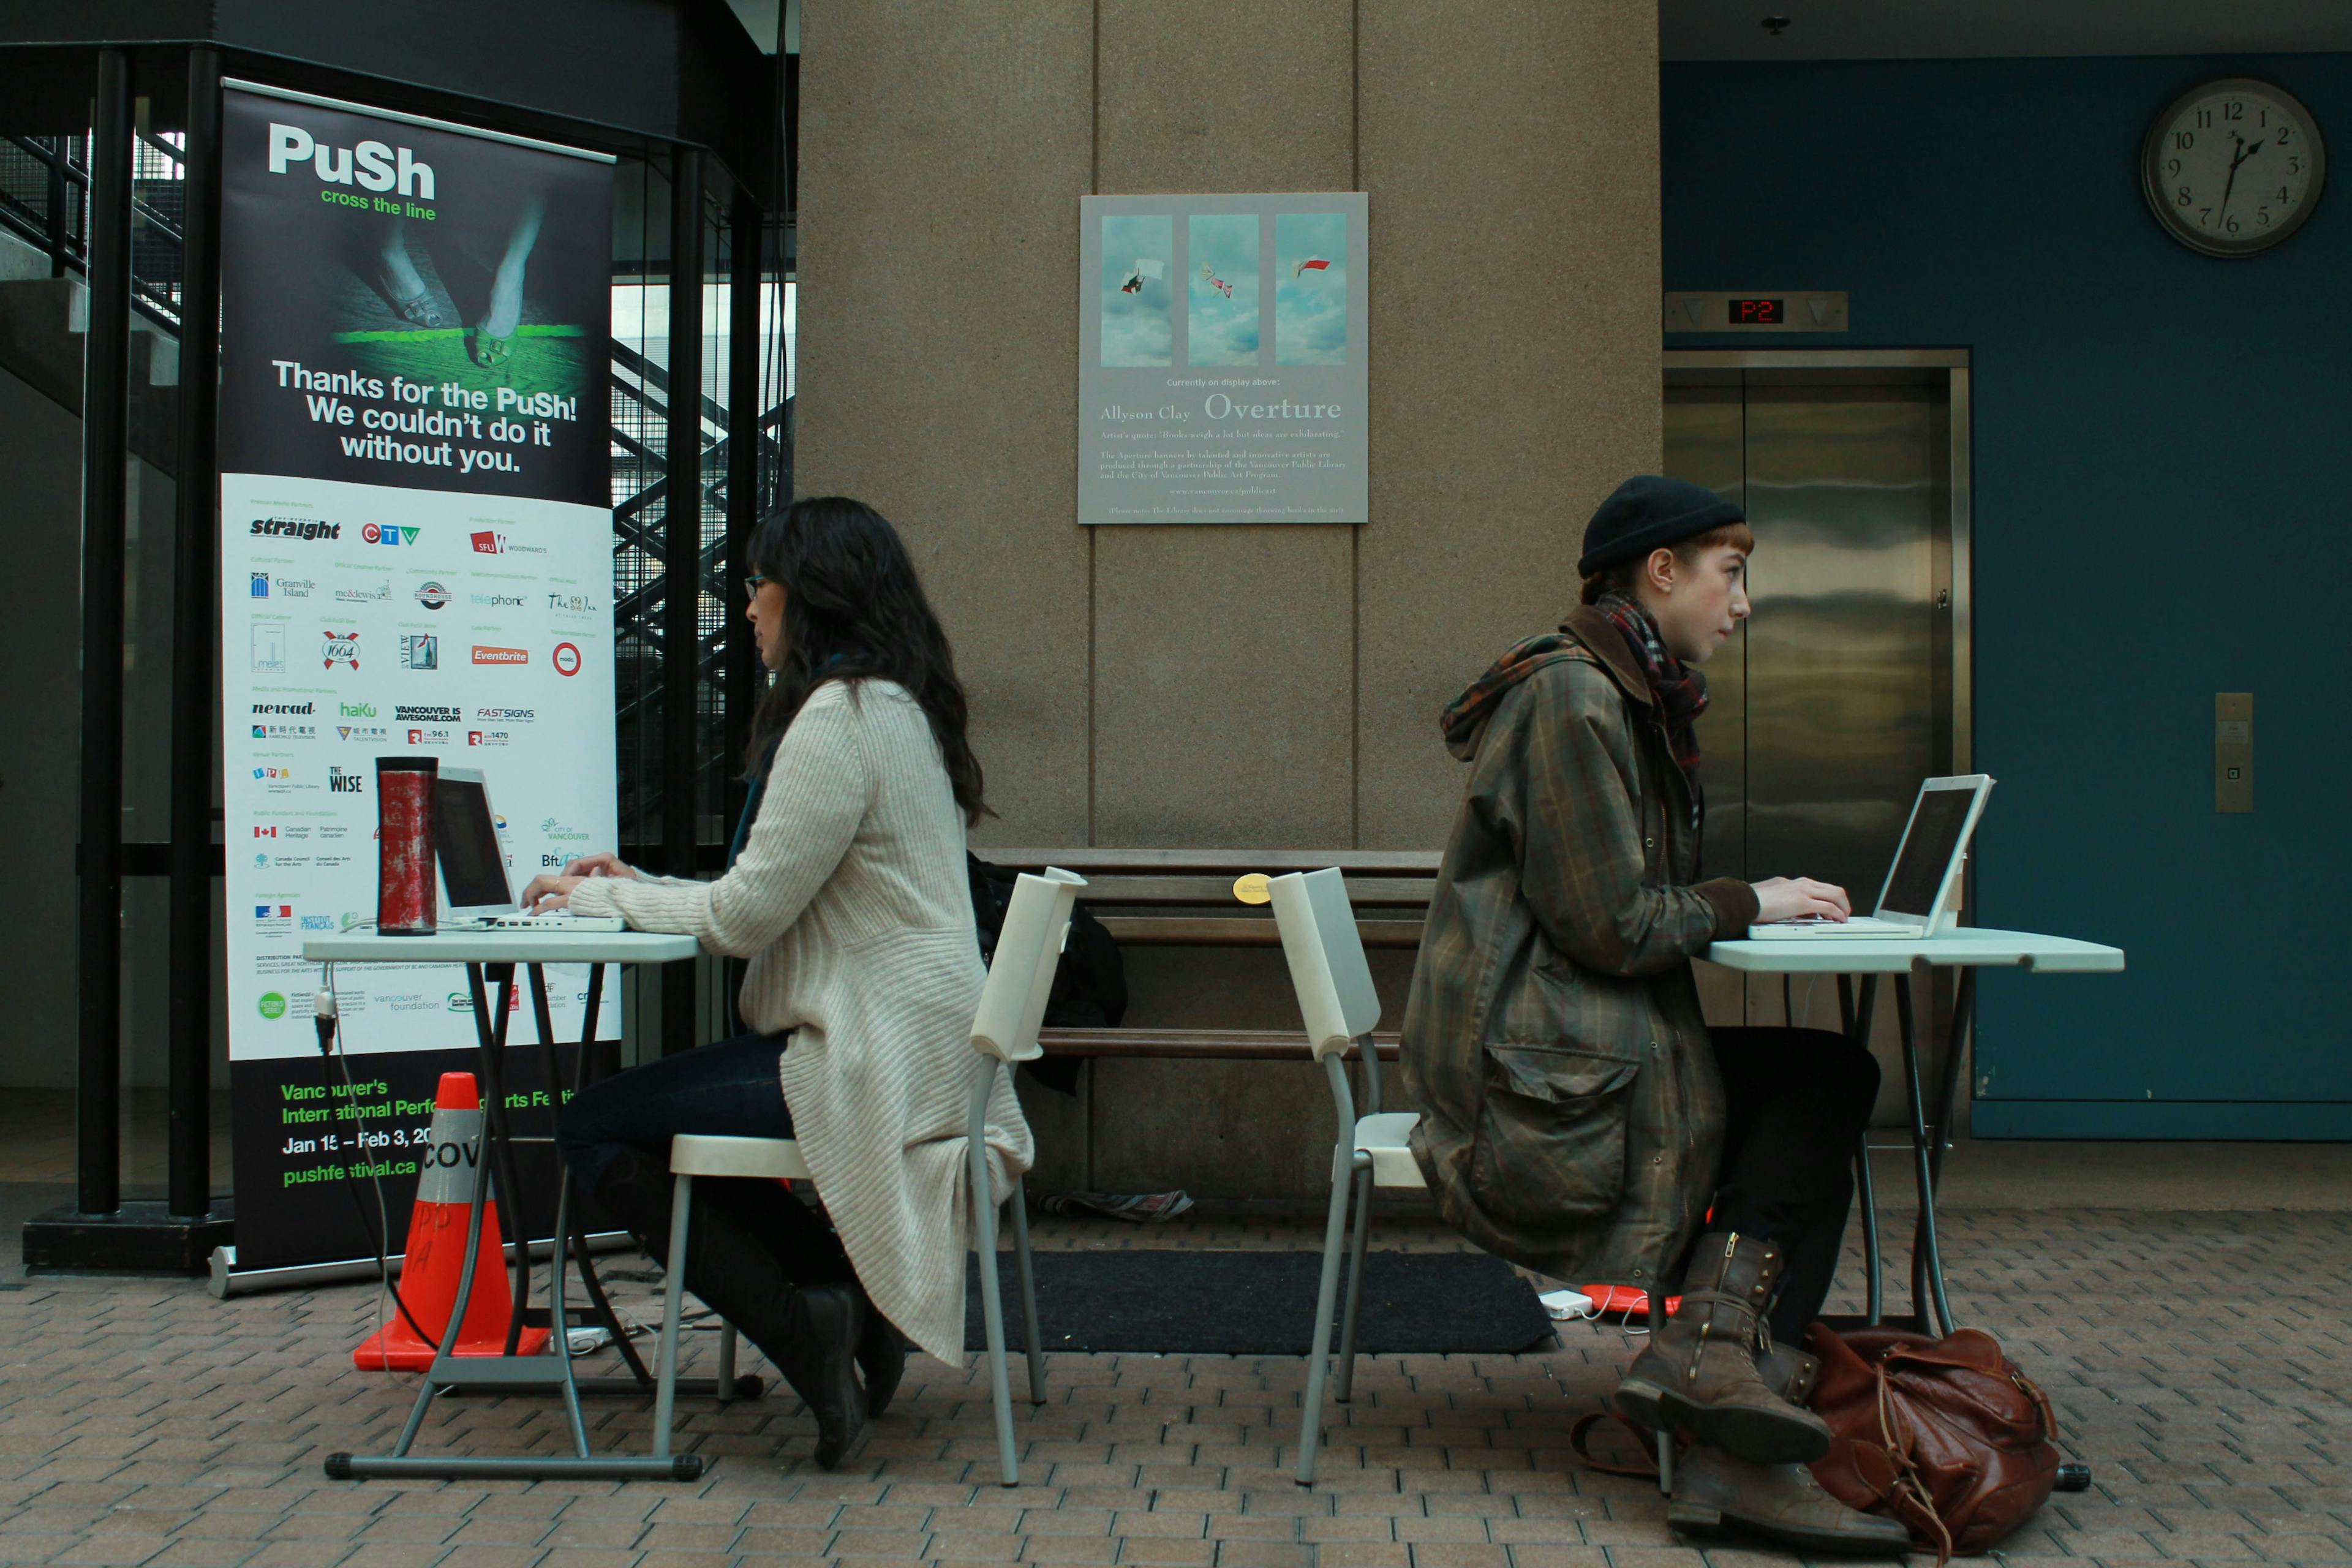 Two people sit back-to-back at folding tables in a public space. Both are typing on white laptops. A large poster for Push Festival is visible behind one desk, an elevator door behind the other.